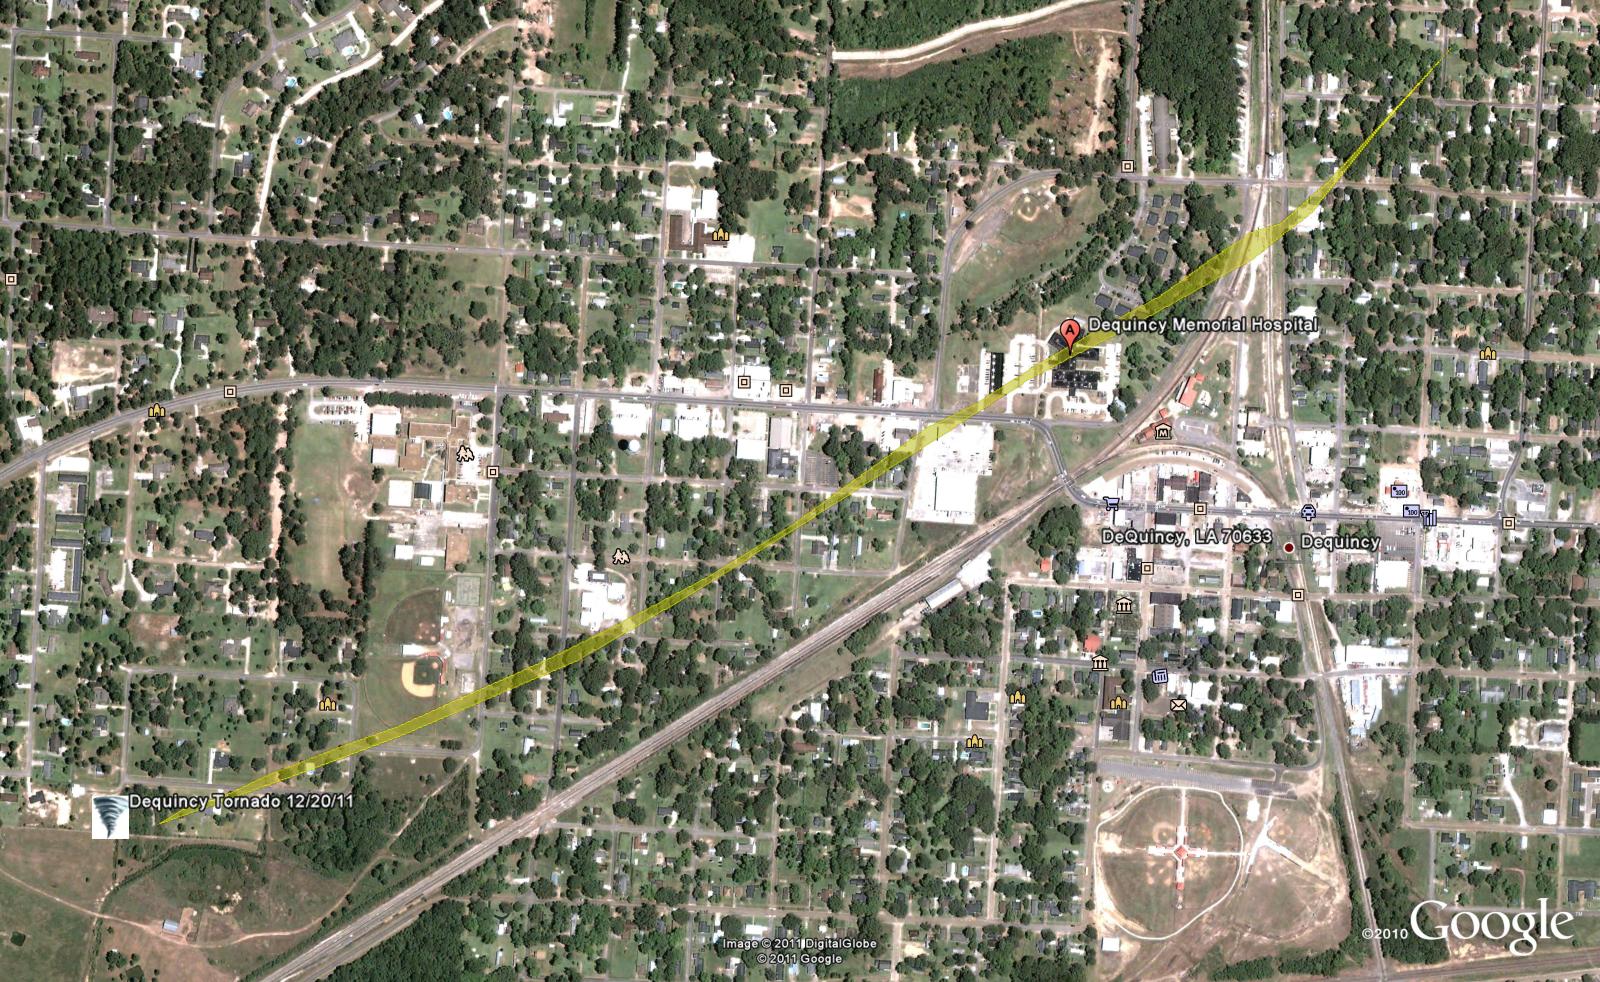 Map of DeQuincy tornado - click for larger image